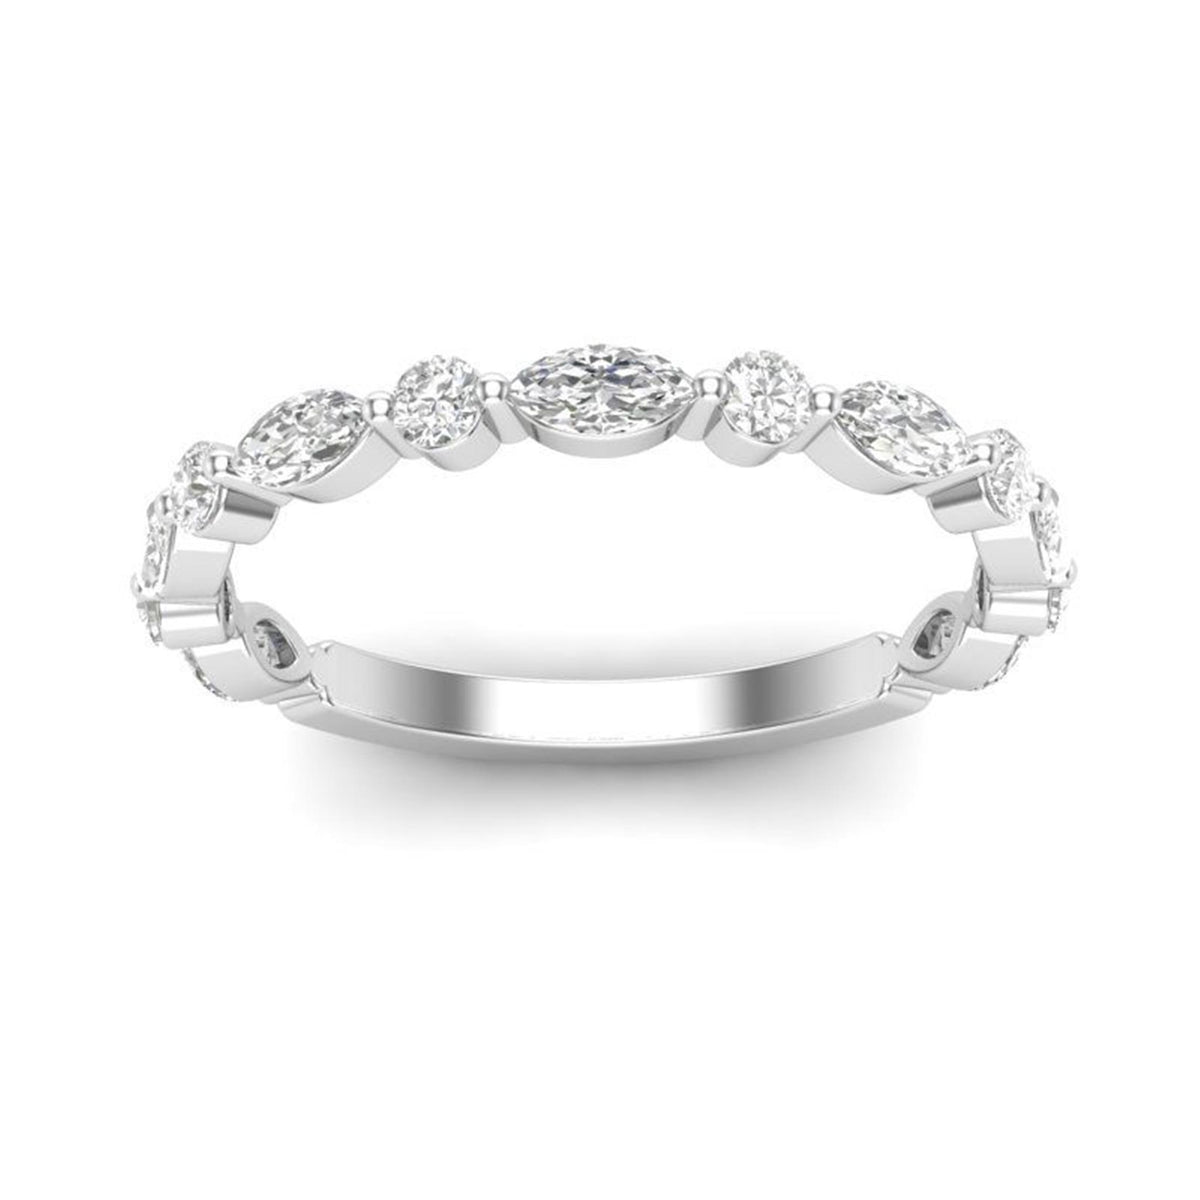 14Kt White Gold Stackable Ring With 0.73cttw Natural Diamonds